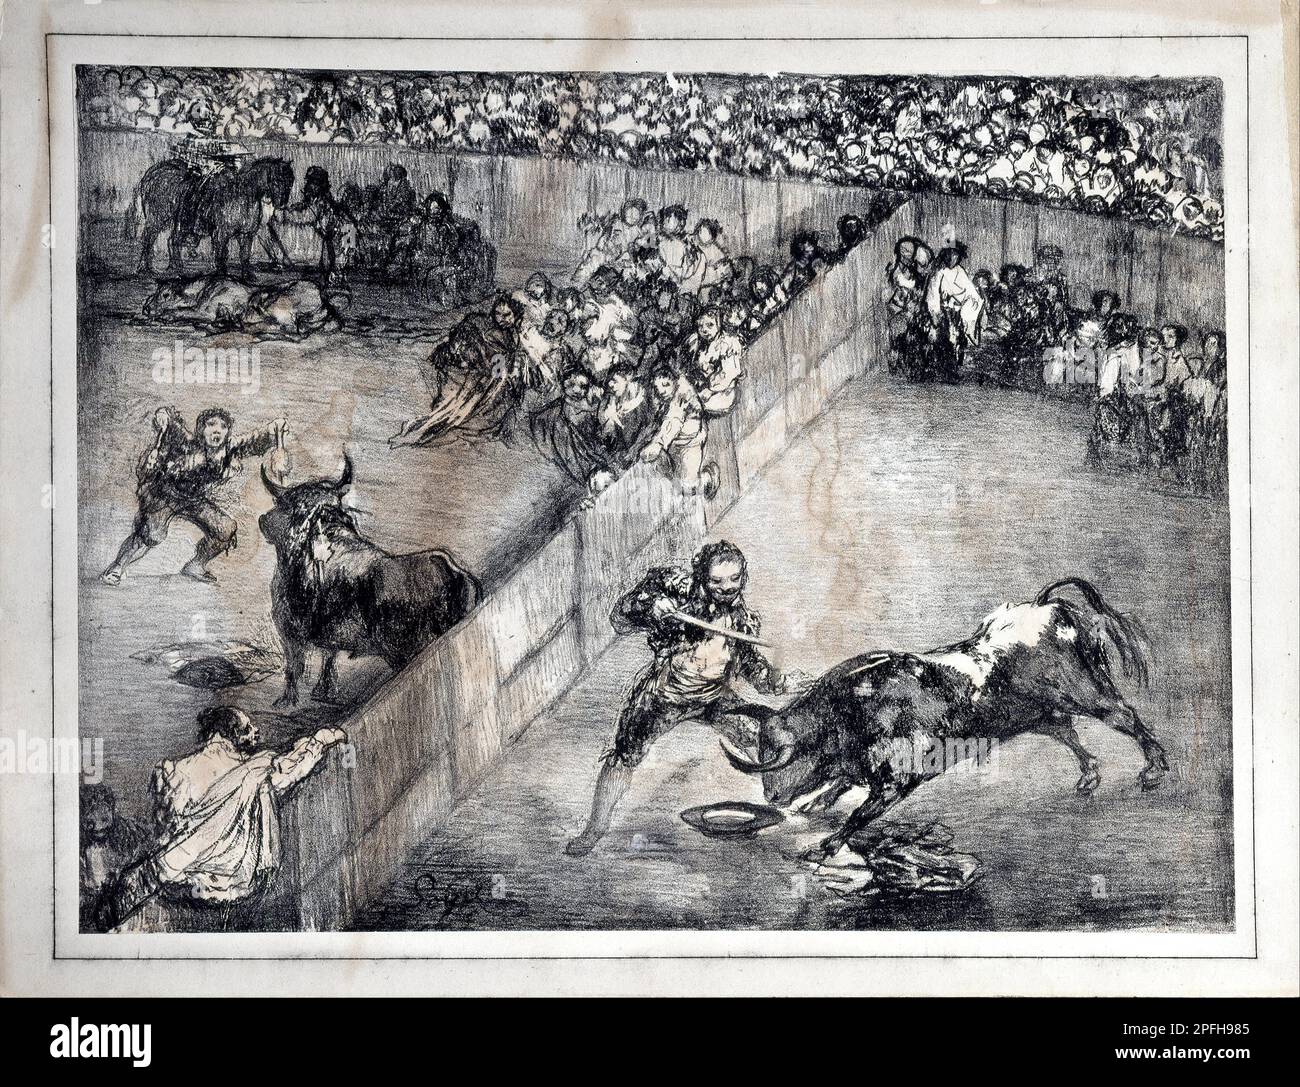 Bullfing in a Divided Ring 1825 by Francisco de Goya y Lucientes Stock Photo